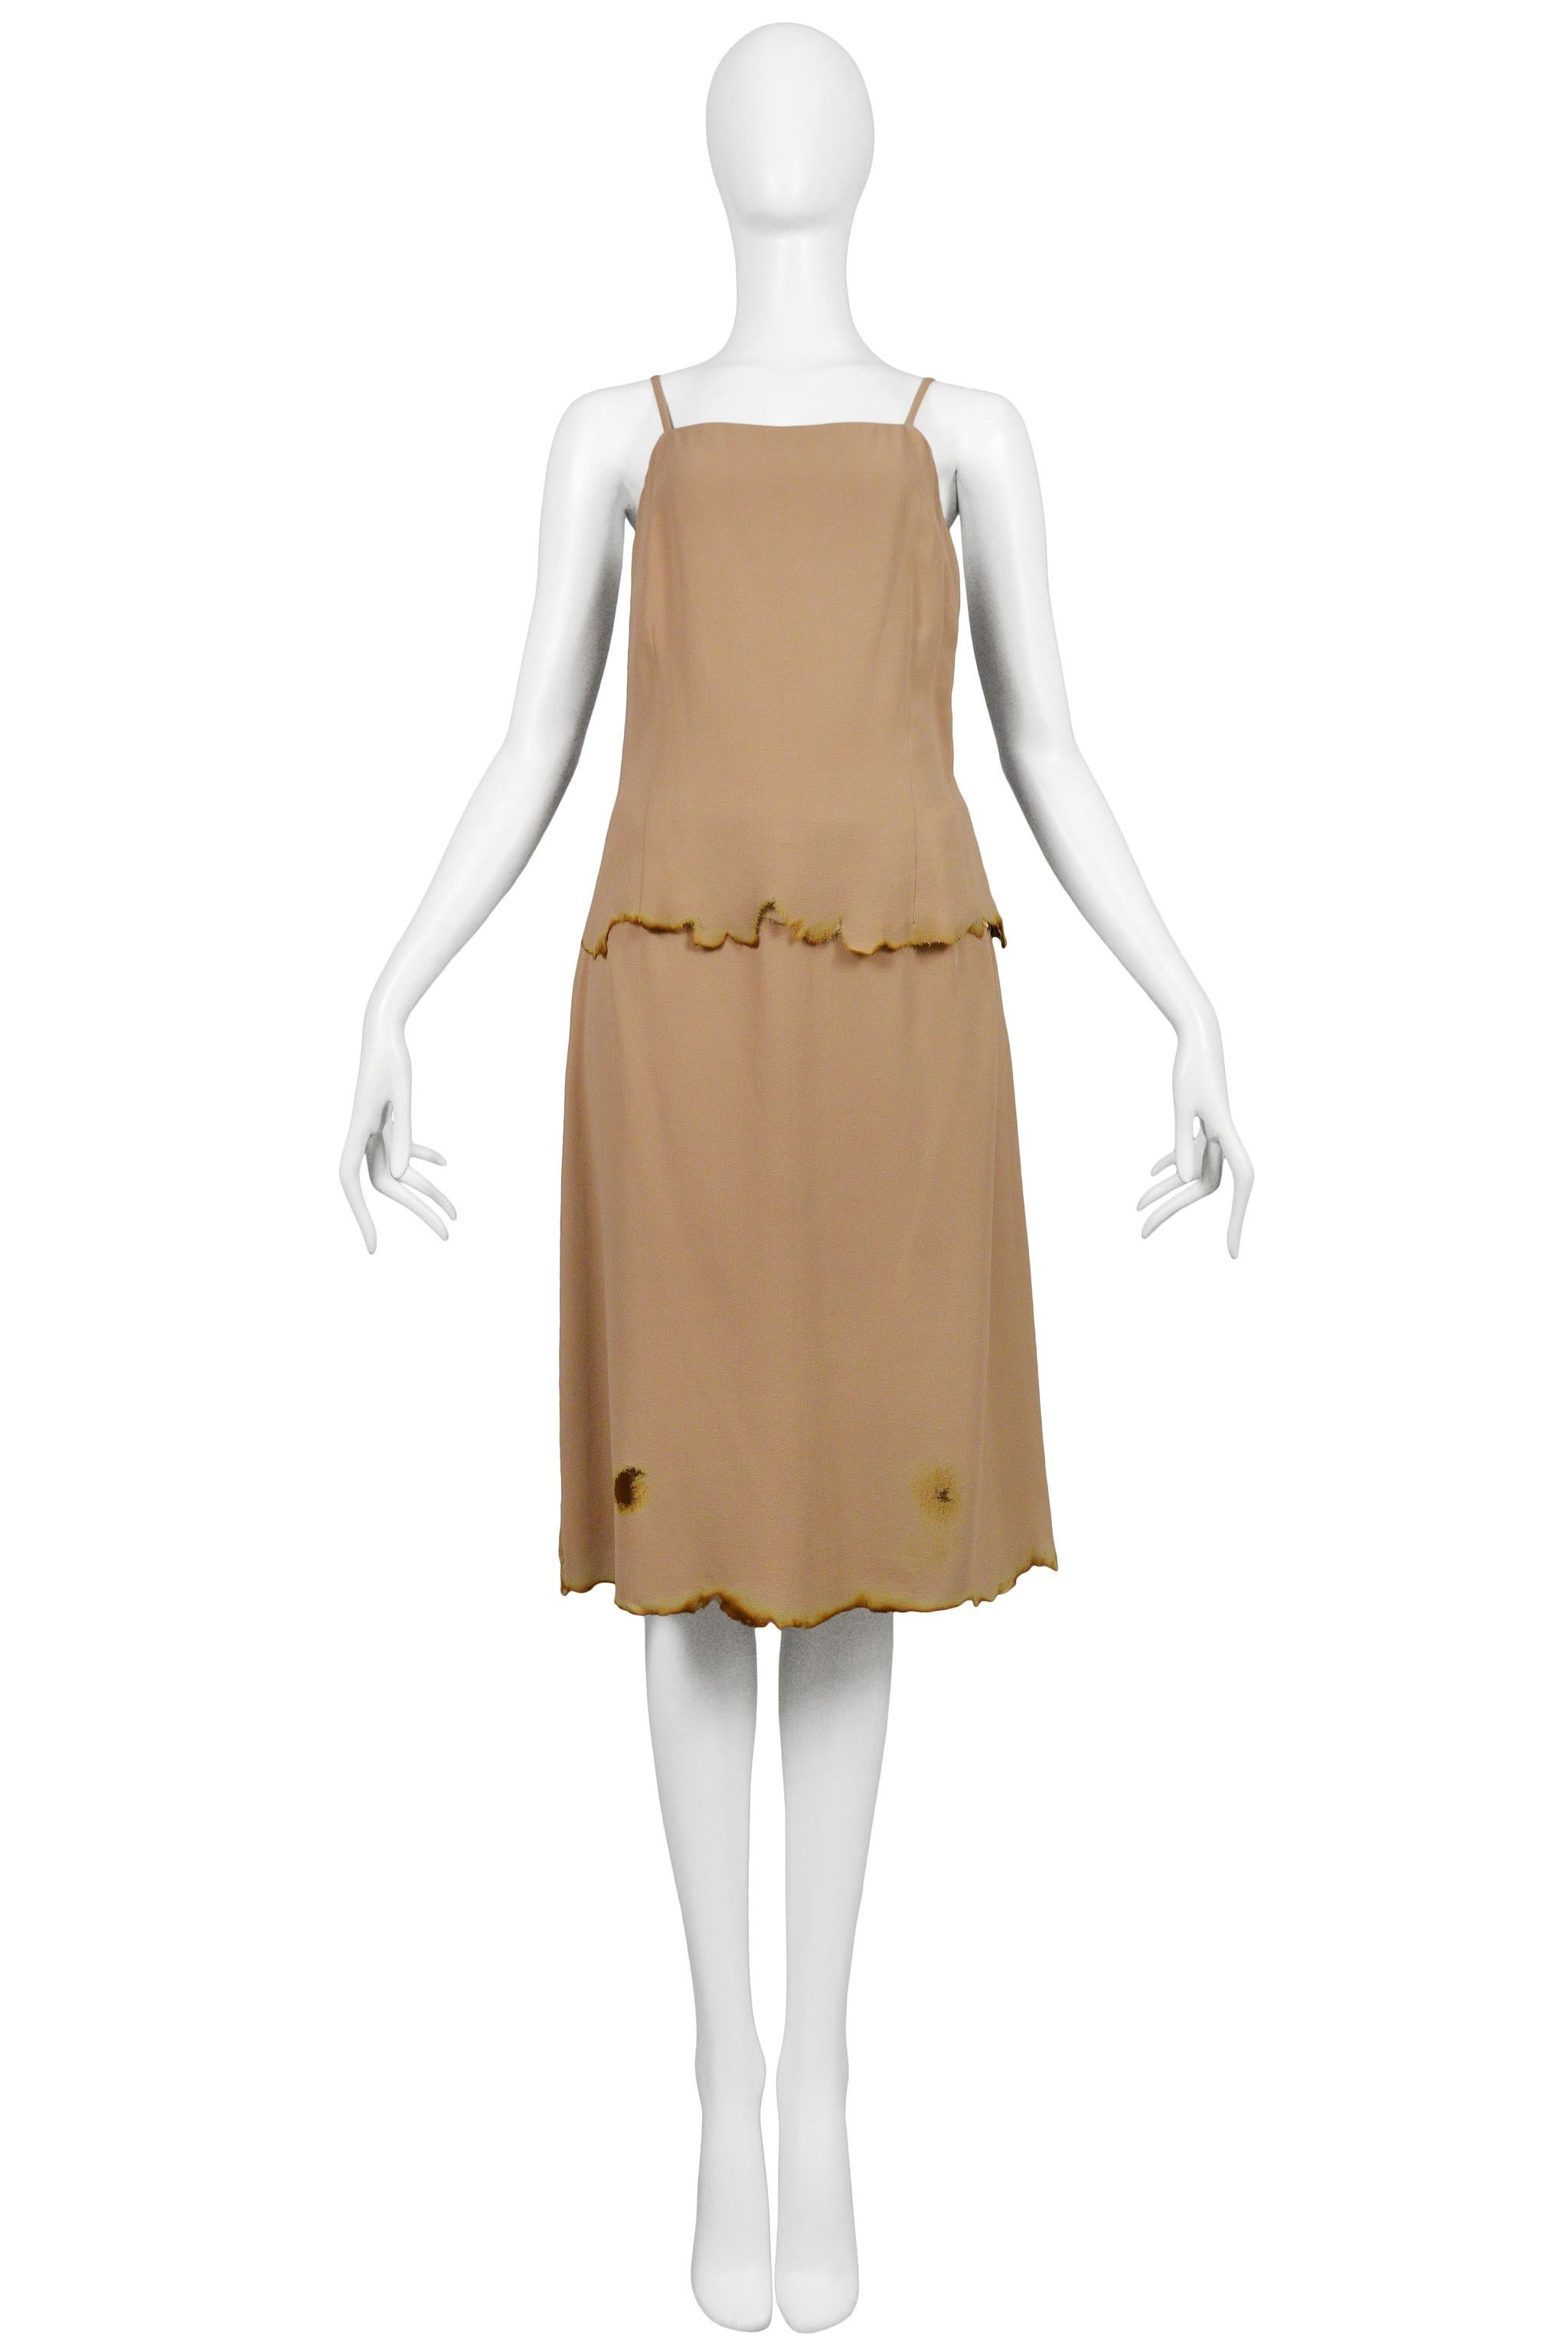 Vintage Martin Margiela nude color spaghetti strap camisole and matching knee-length skirt both featuring singed edges along the hems. Circa the early 2000's.

Maison Martin Margiela
Artisanal
Size: 38
Wool and Crepe
2000s Collection
Excellent